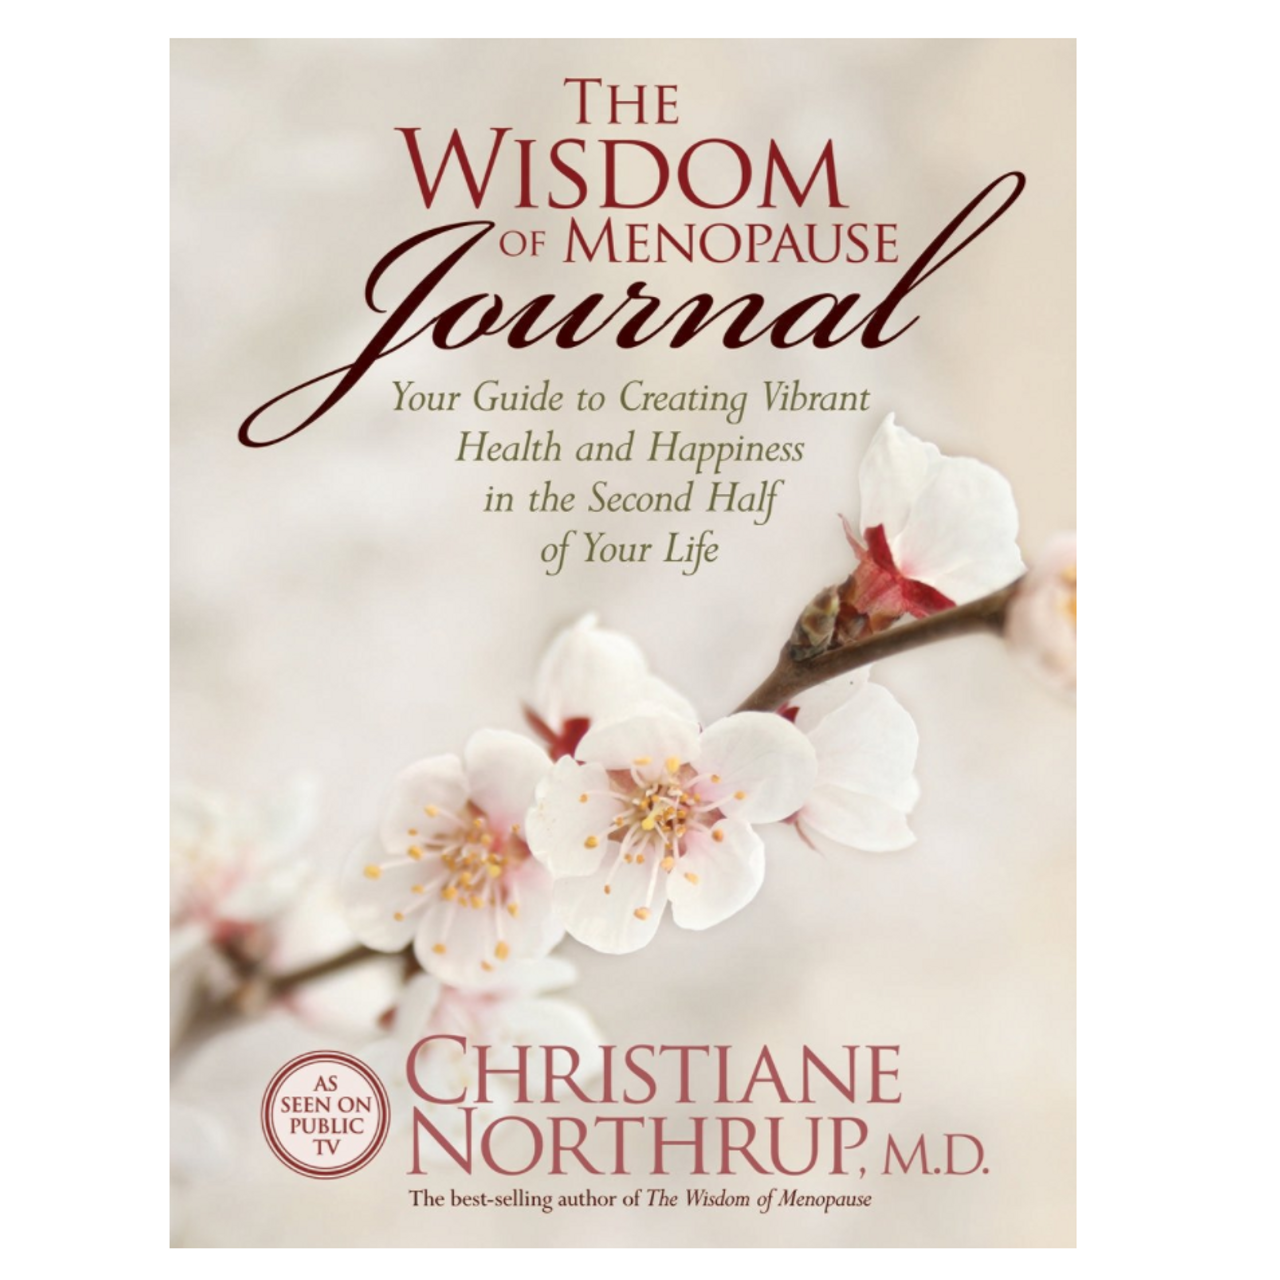 Journal The Wisdom of Menopause Journal